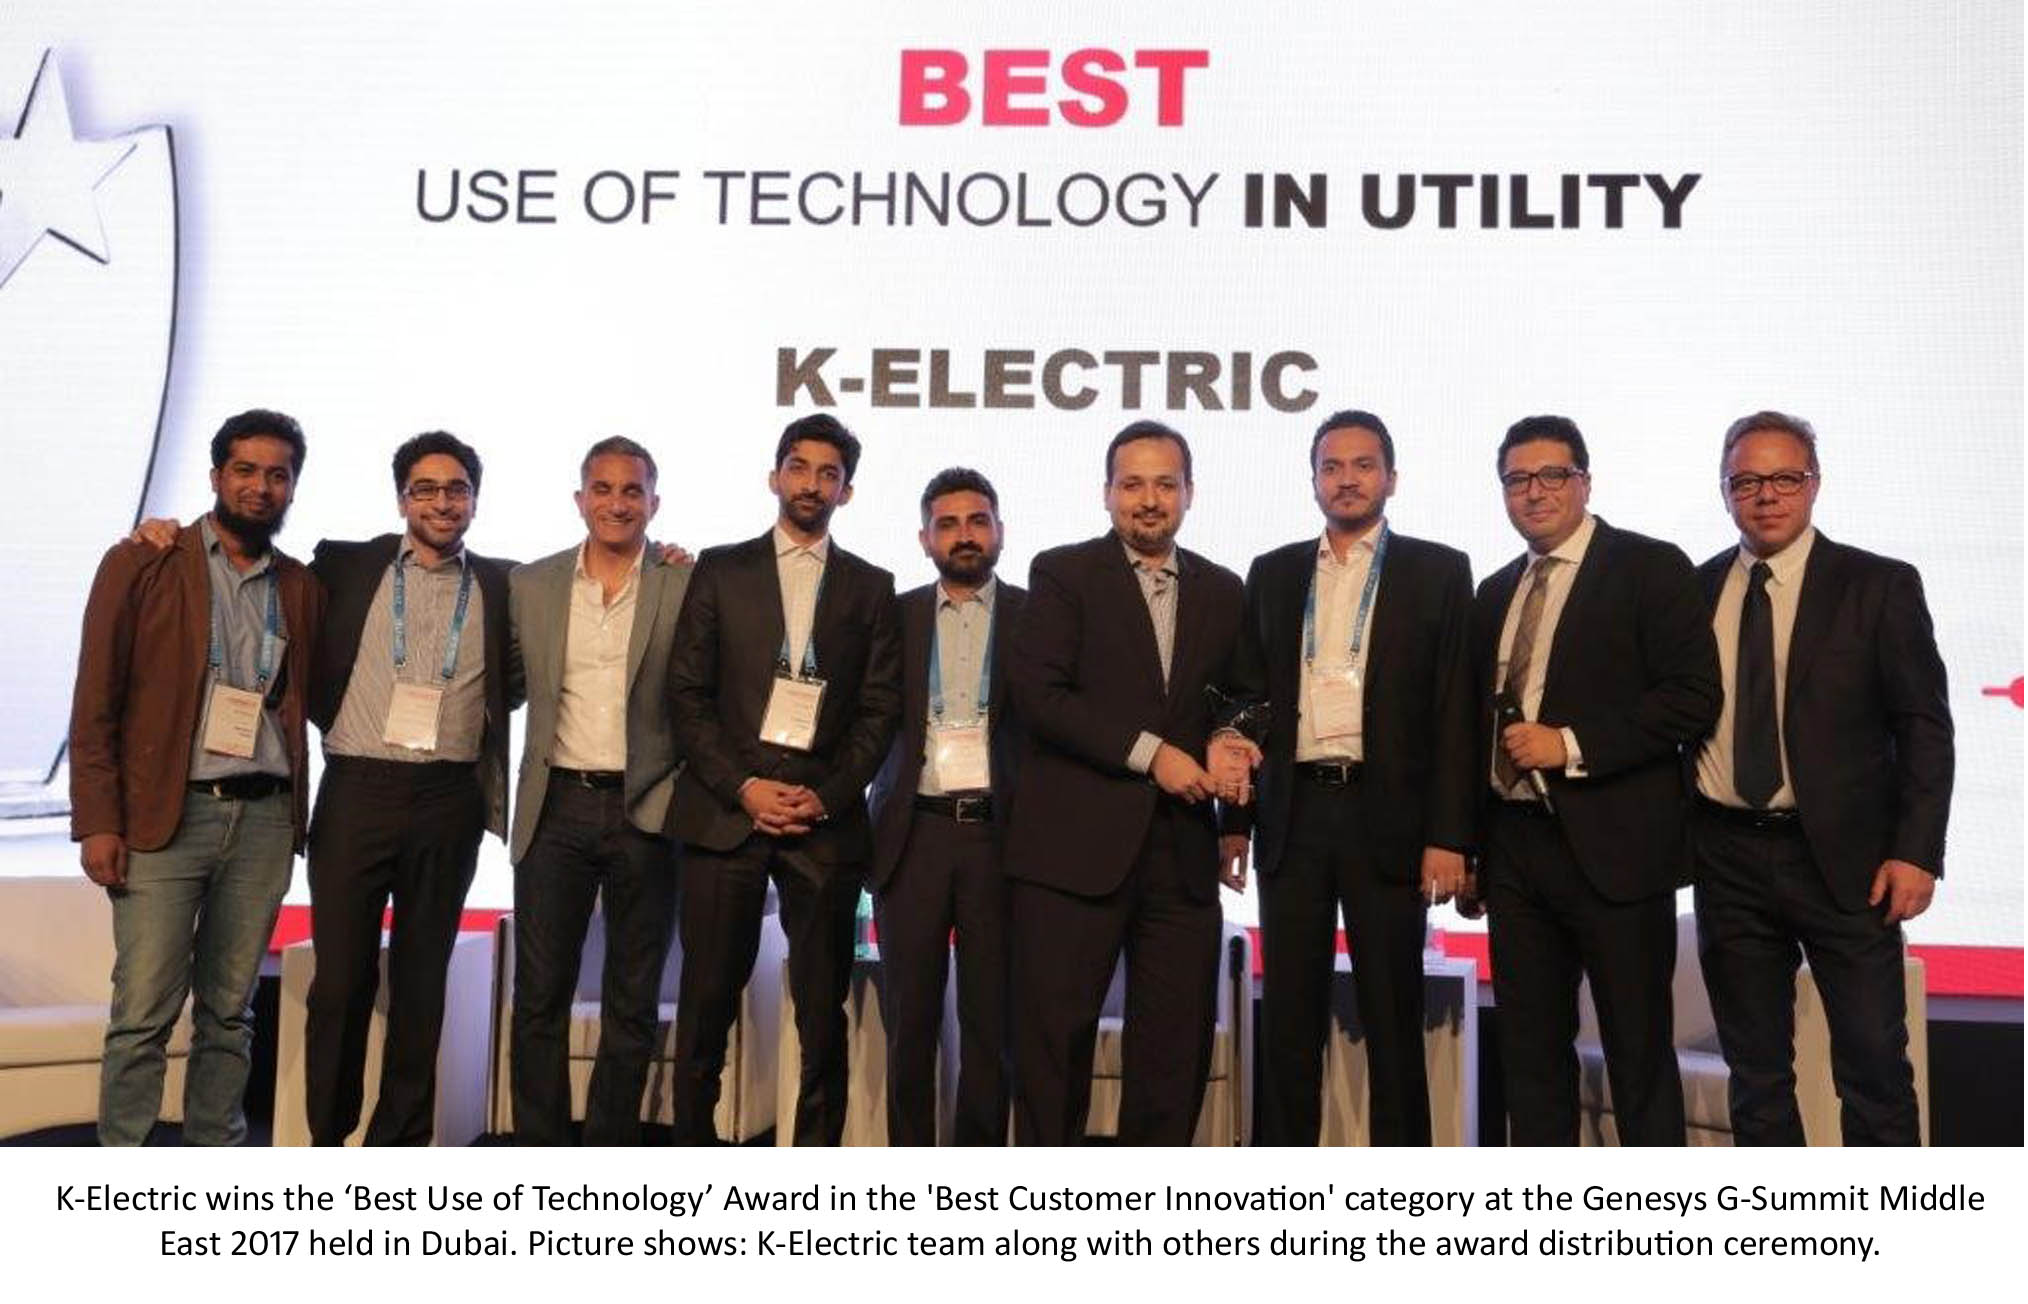 K-Electric Customer Care Excellence Wins Regional Award for Best Use of Technology